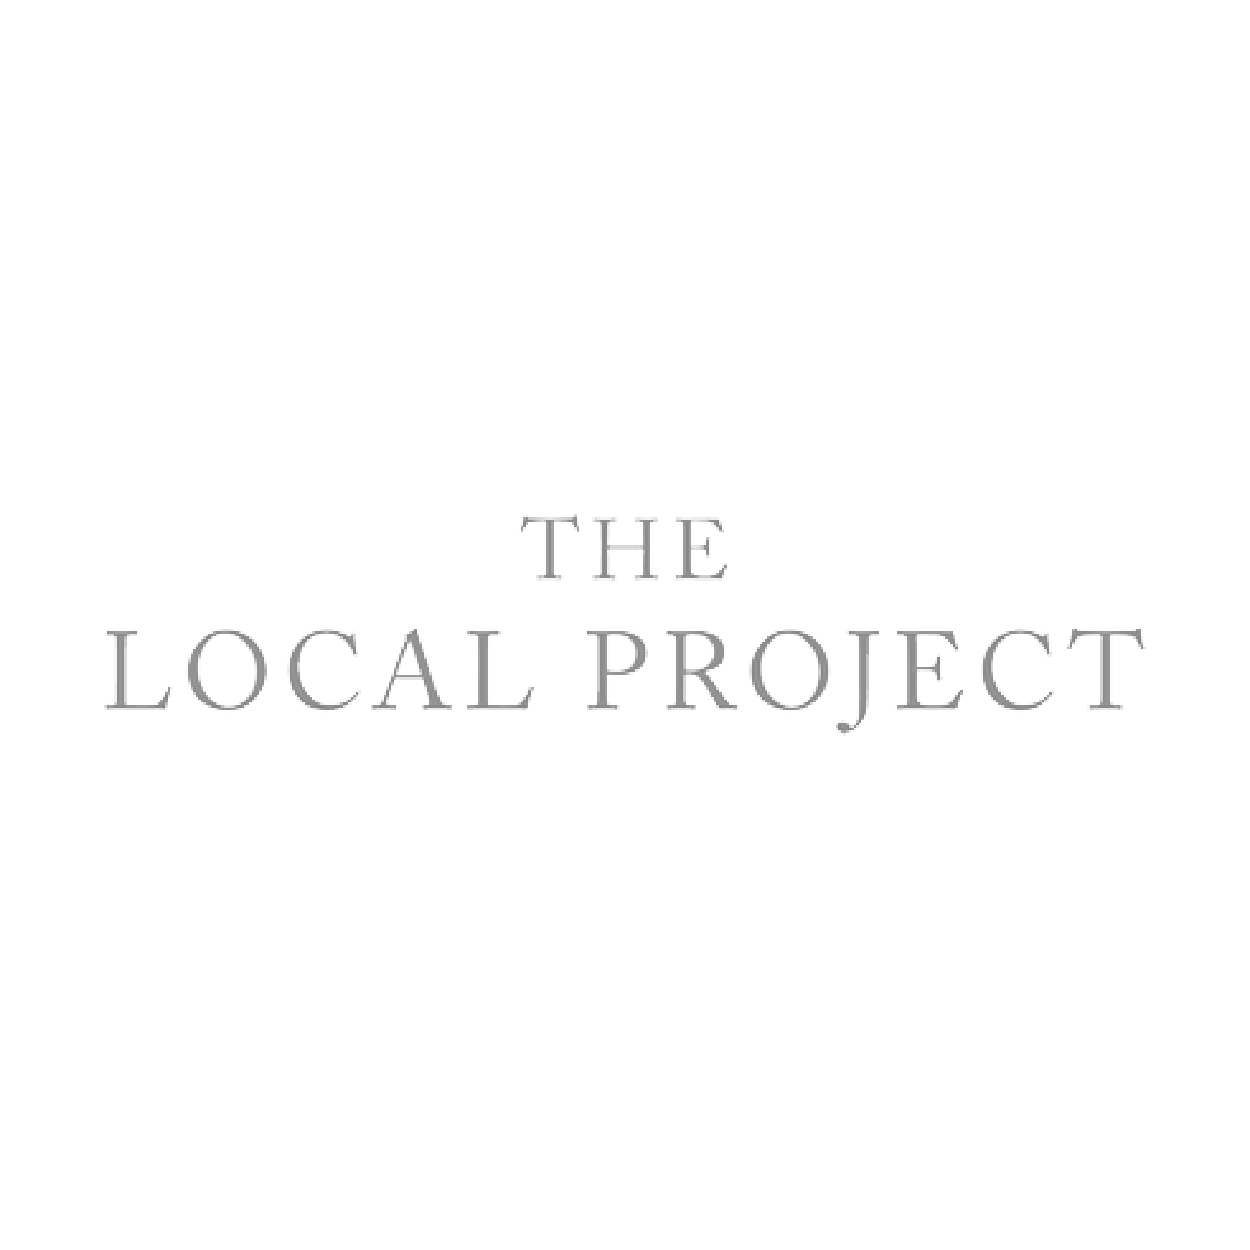 featured_in_the_local_project.png